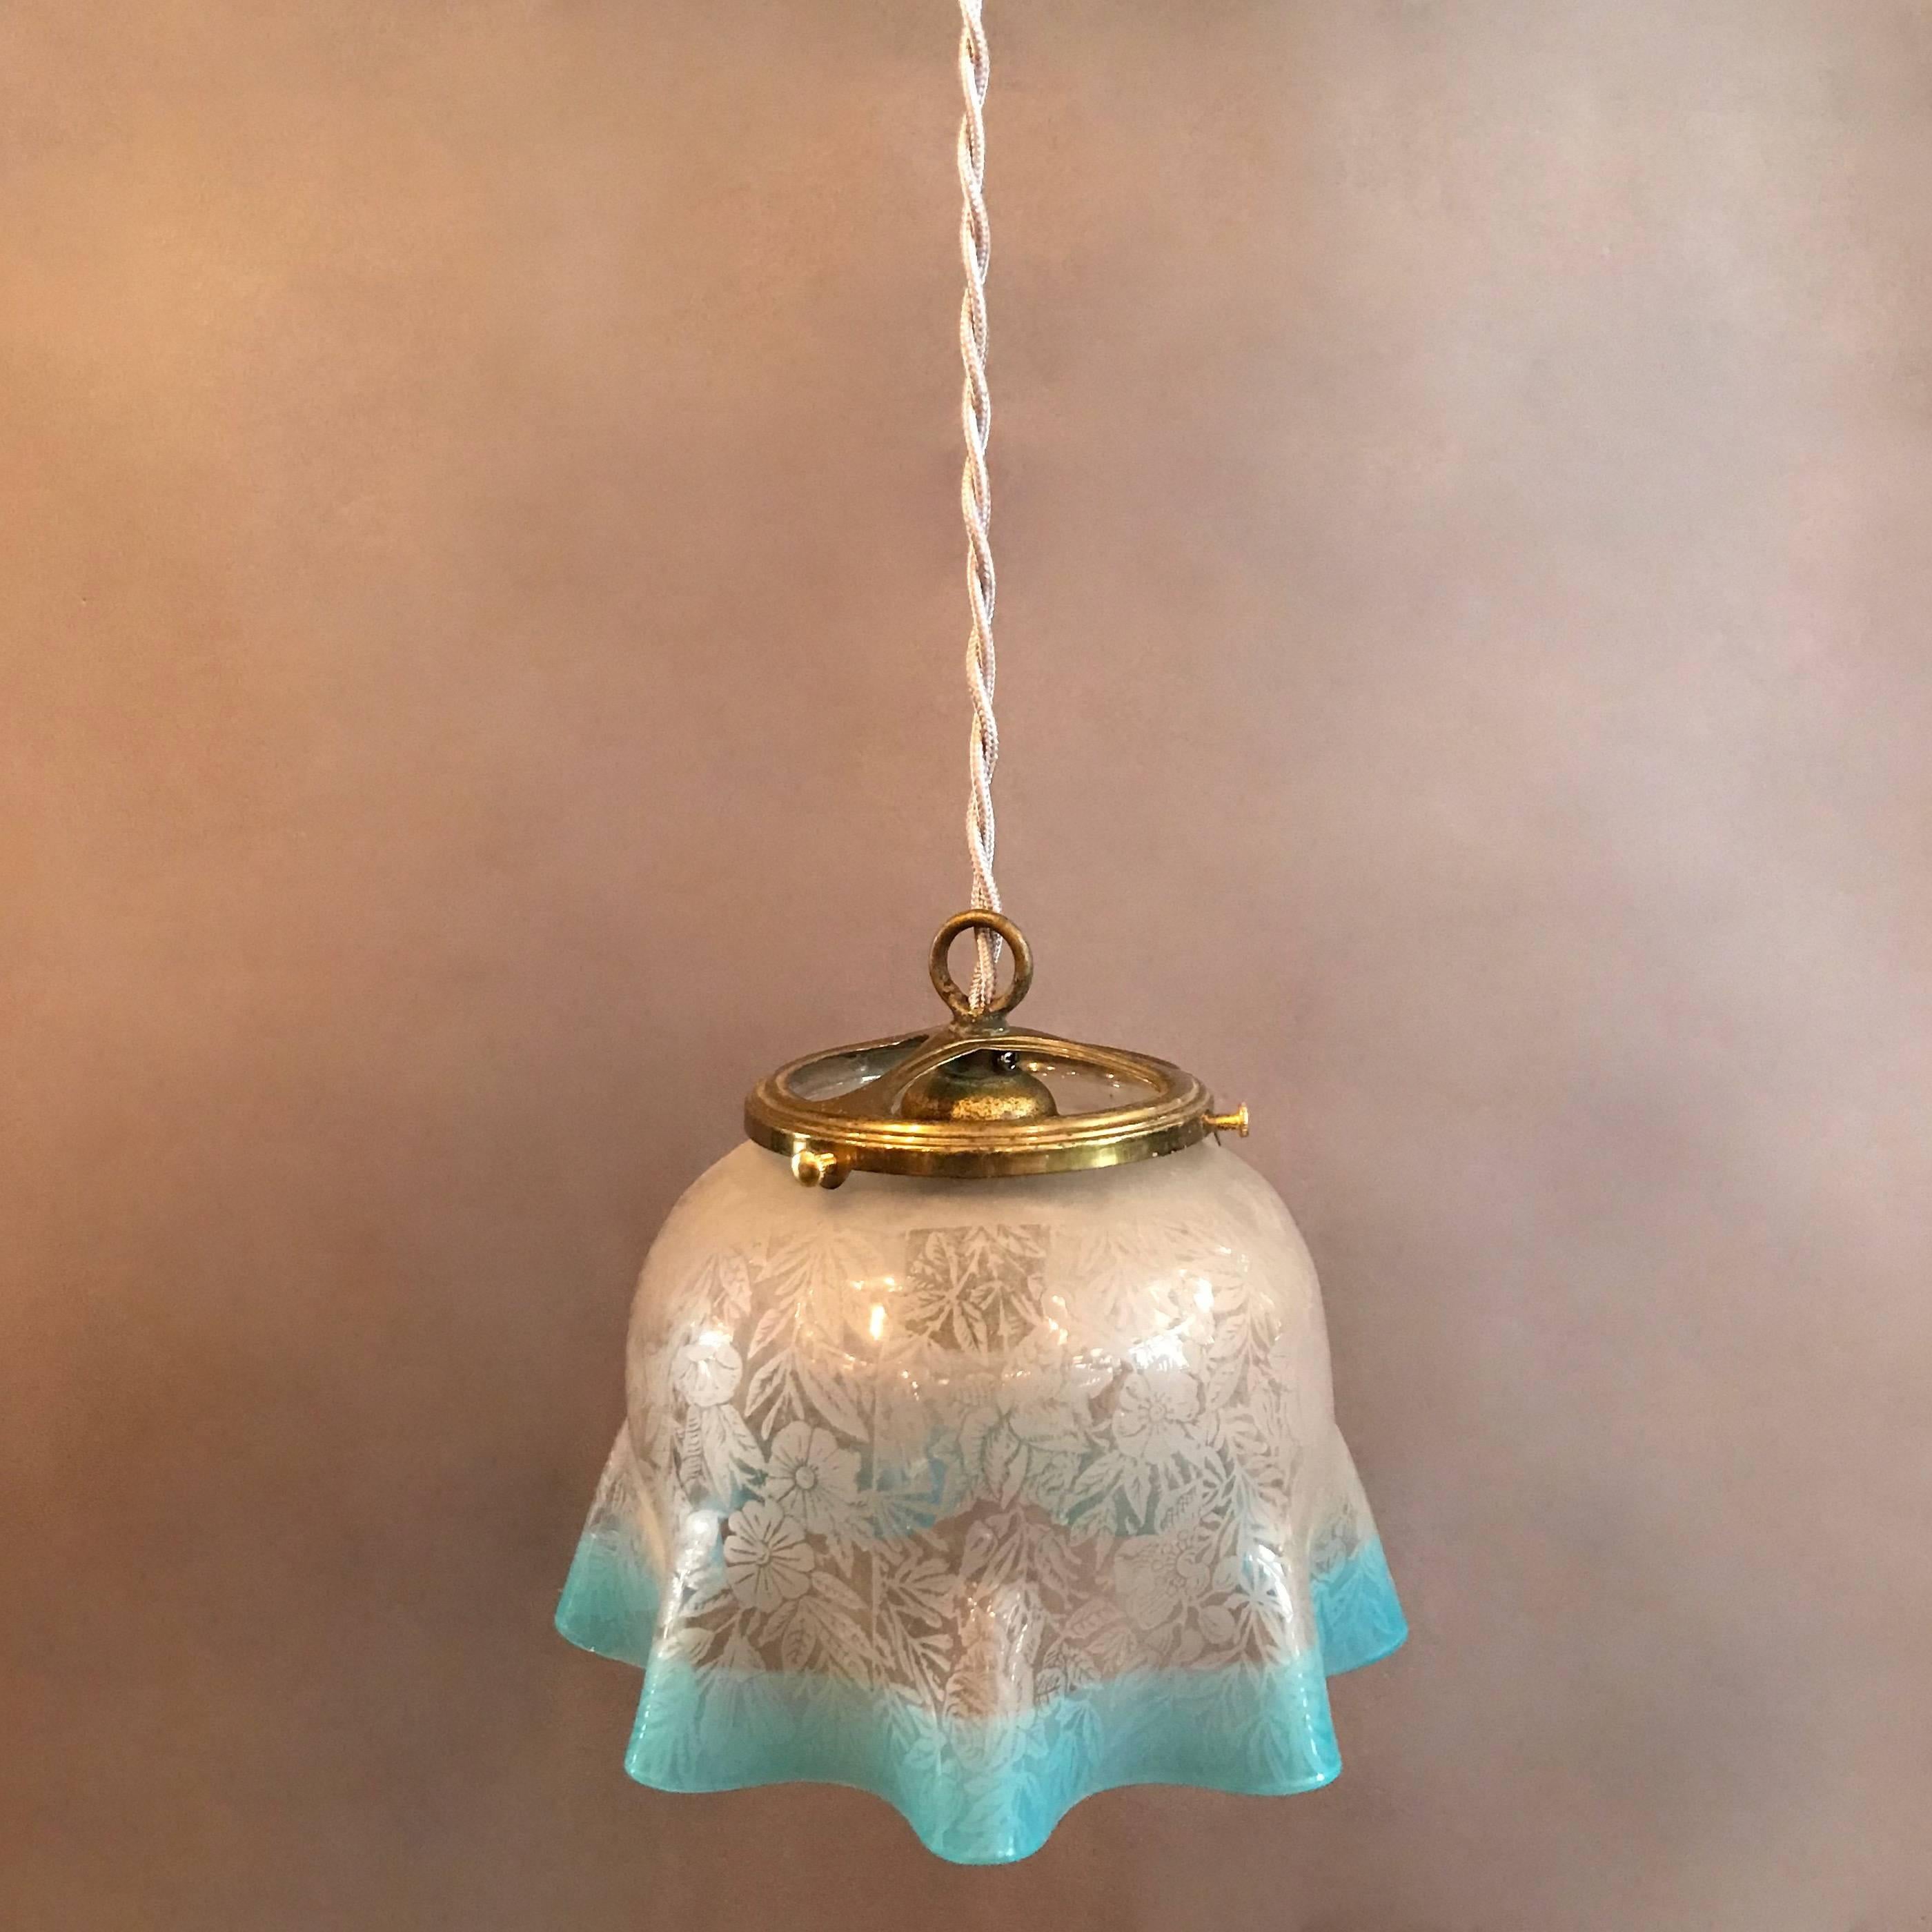 etched glass pendant light